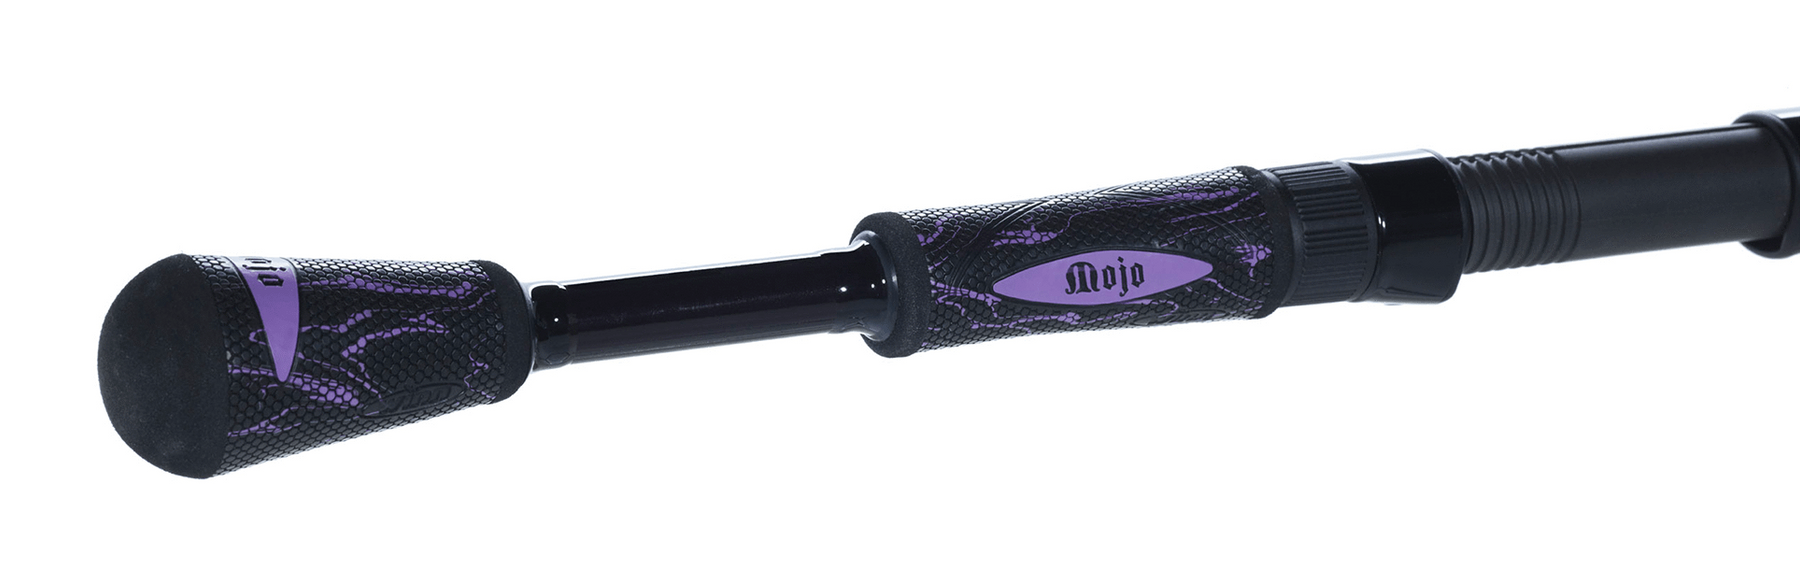 Product Review: St. Croix Mojo Yak Rods